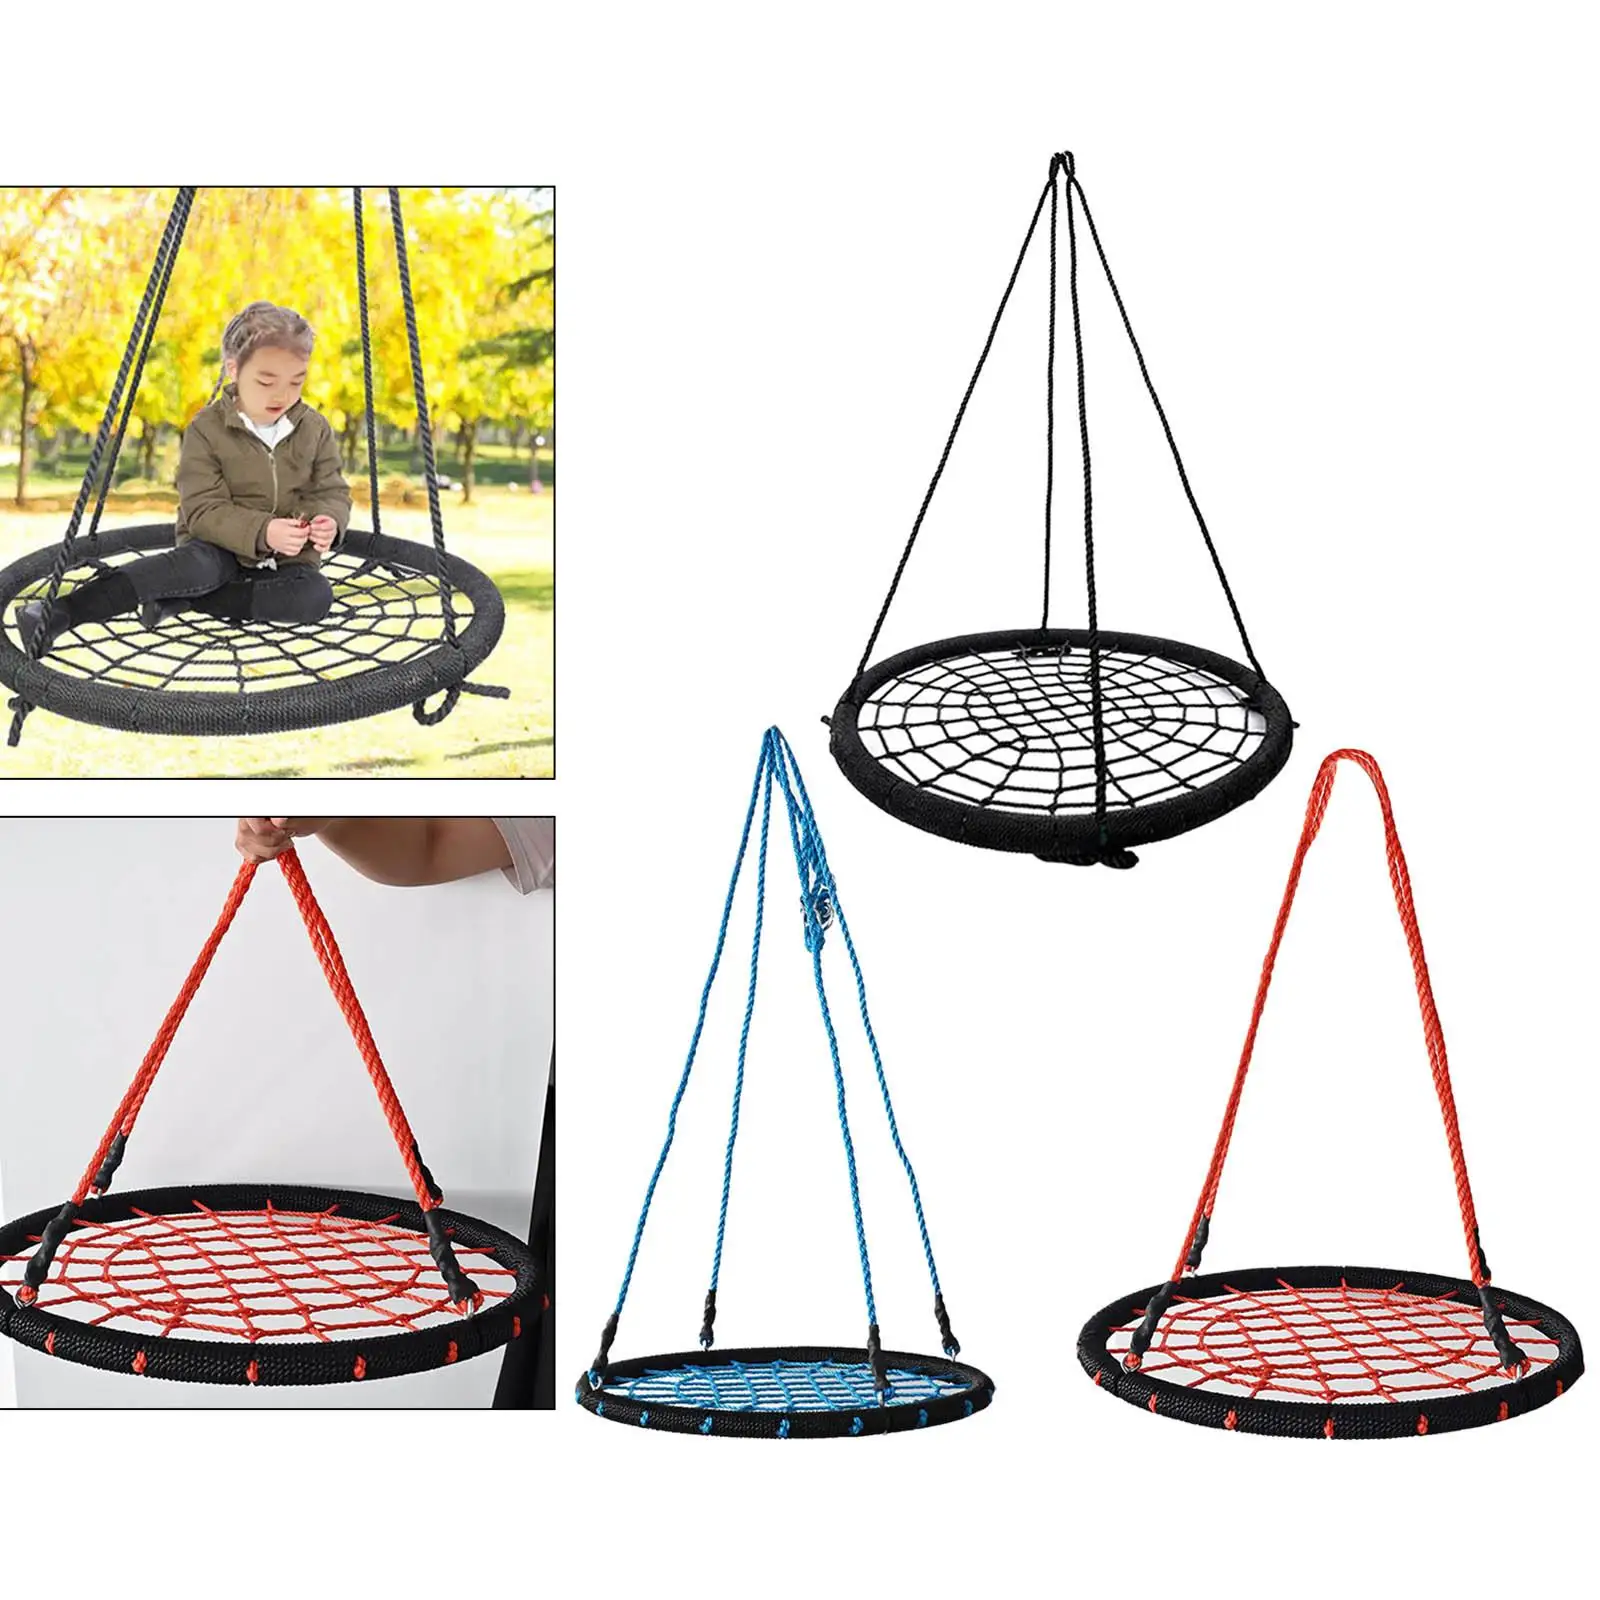  Rope Adjustable Max 150kg Hanging Playground Accessory Round for Balcony Outdoor Indoor Bedroom Adults Gifts